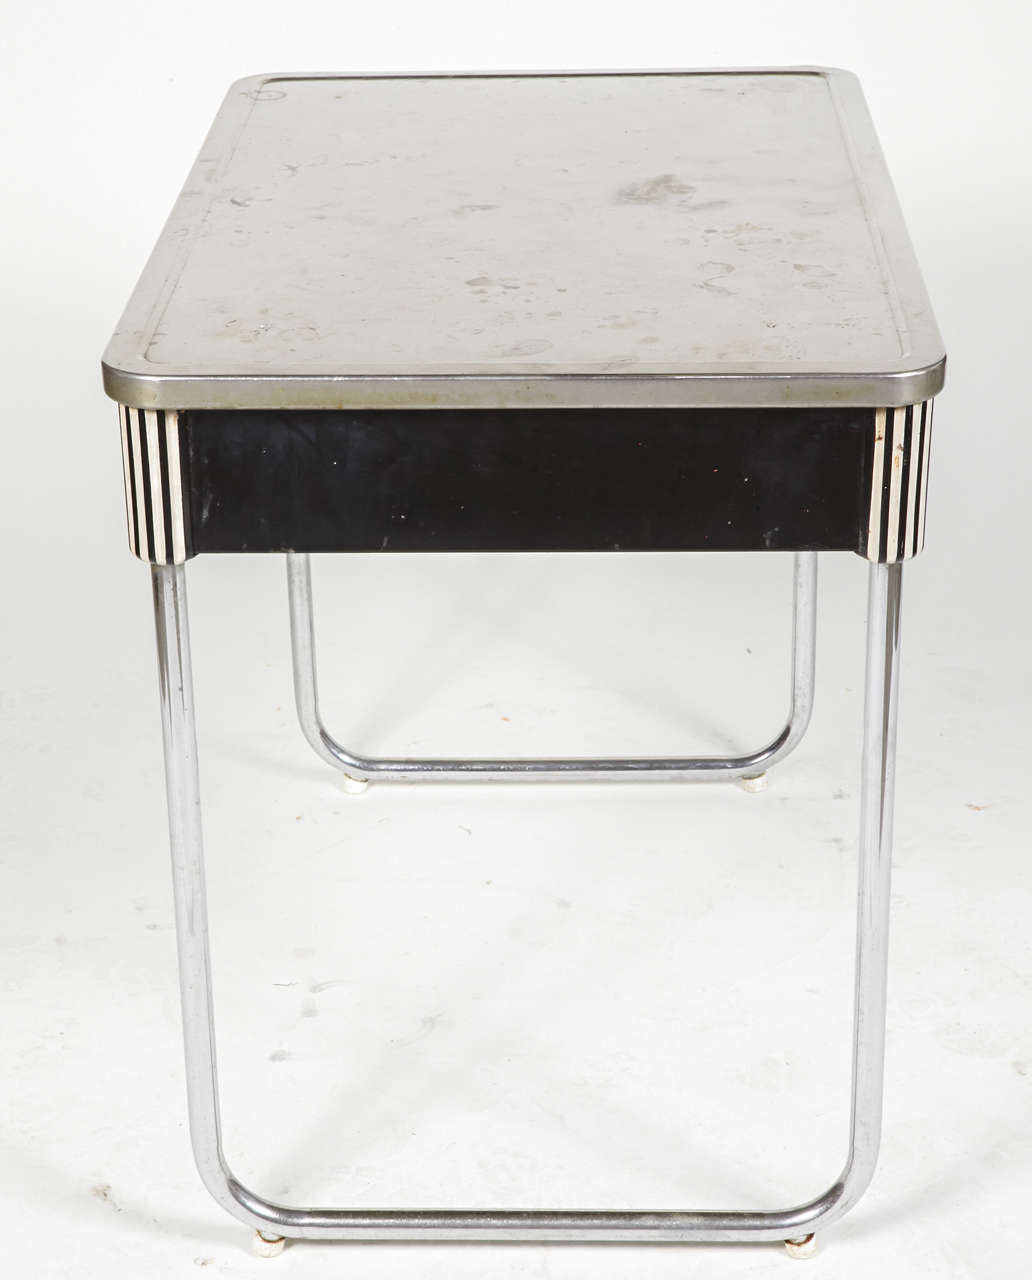 Iconic Art Deco or Machine Age Smartline Kitchen Table by Raymond Patten For Sale 3